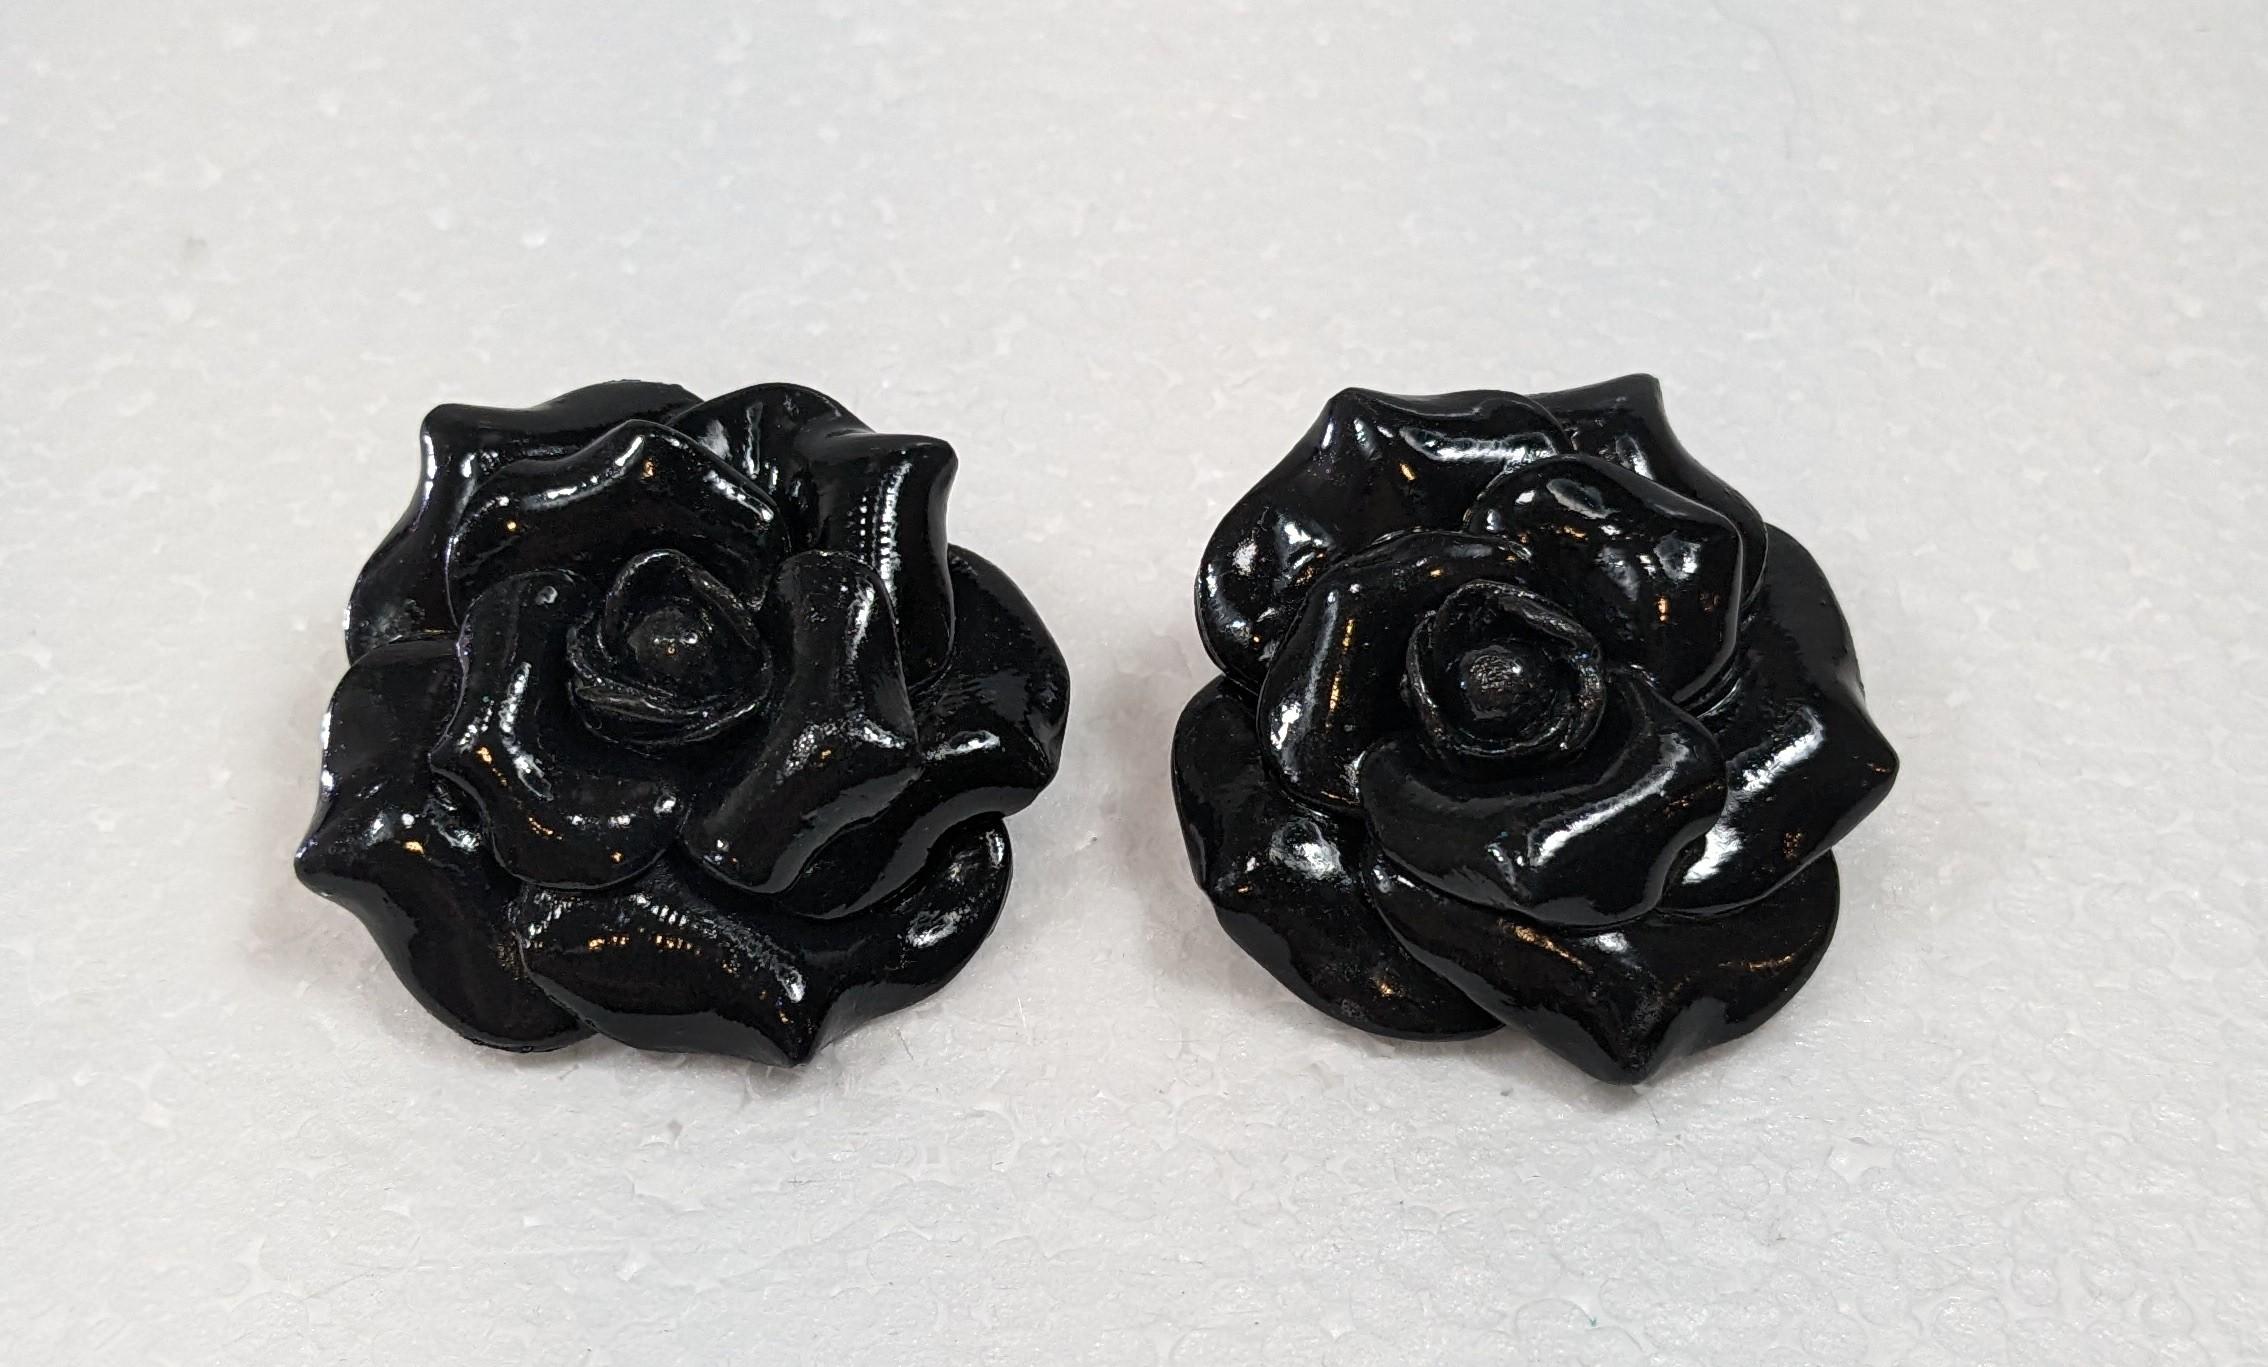  Black Camelia Polymer  Clay Earrings with golplated silver closure

Diameter: 4 cm
Weight: 14,5 grams
Color  Black
Handmade




Pradera Fashion Division  is specialized in European Fashion designers, clothing, handbags, accessories and as such we